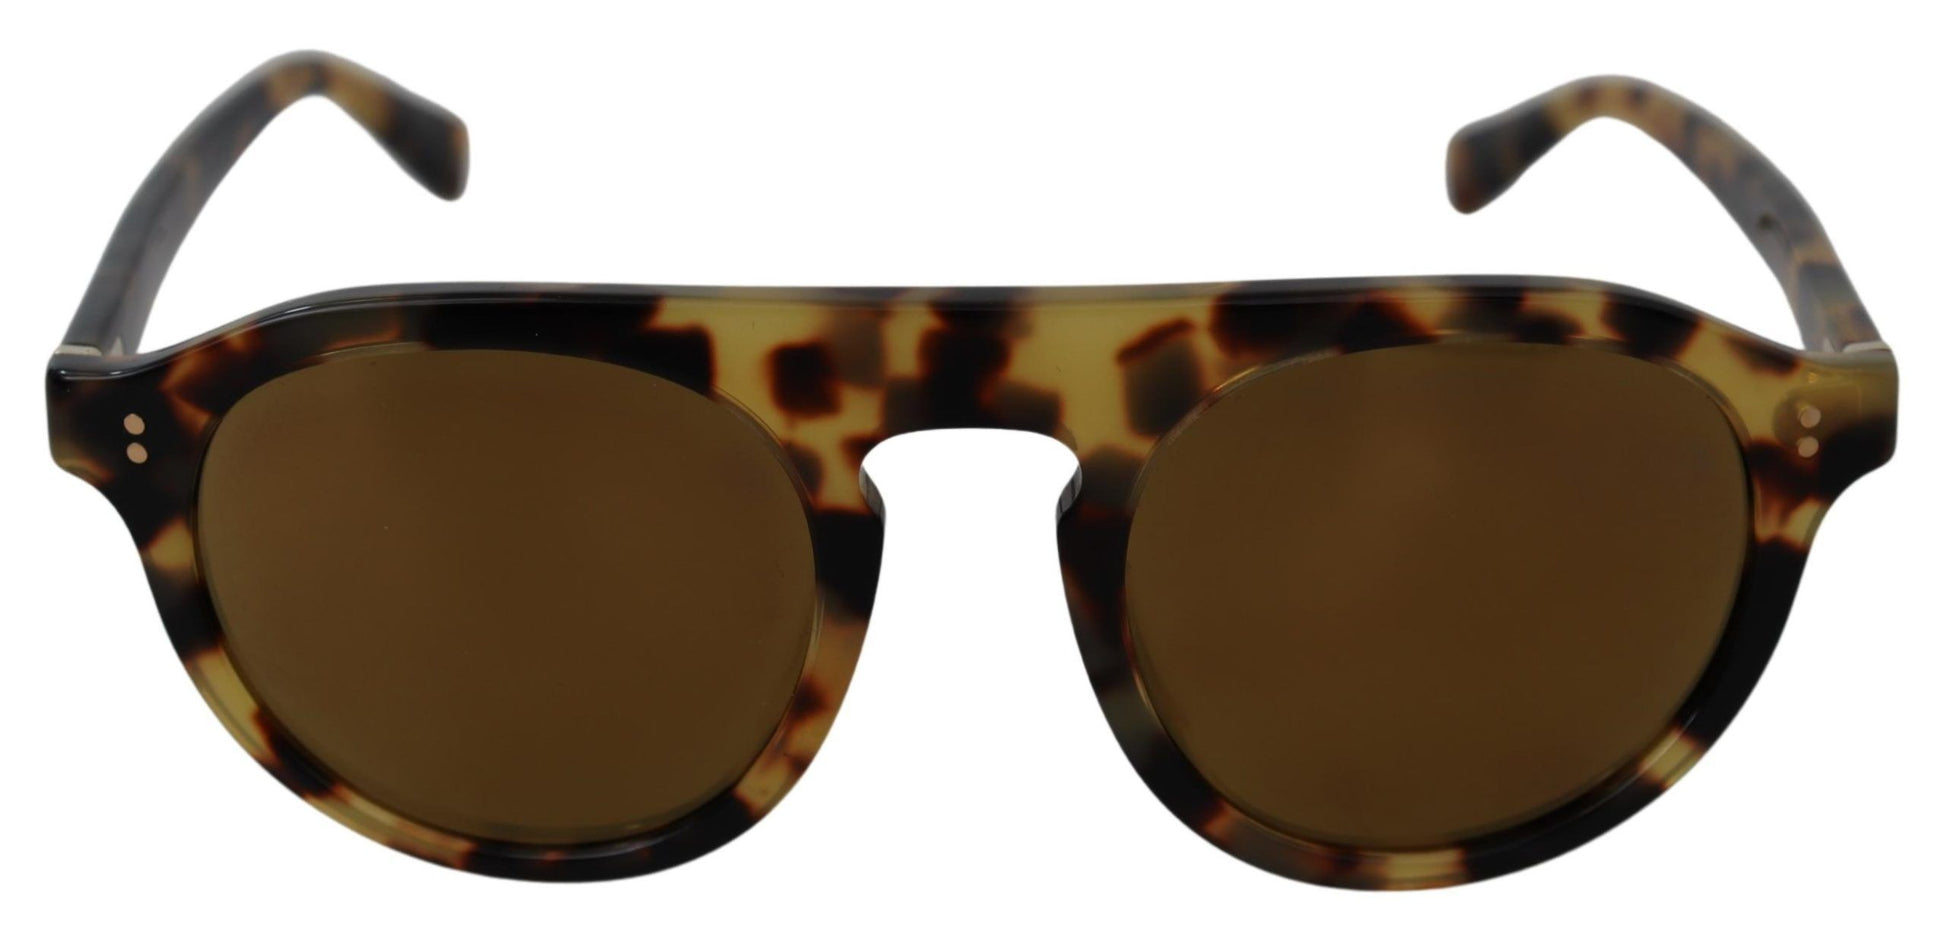 Dolce & Gabbana Brown Tortoise Oval Full Rim Sunglasses - Designed by Dolce & Gabbana Available to Buy at a Discounted Price on Moon Behind The Hill Online Designer Discount Store